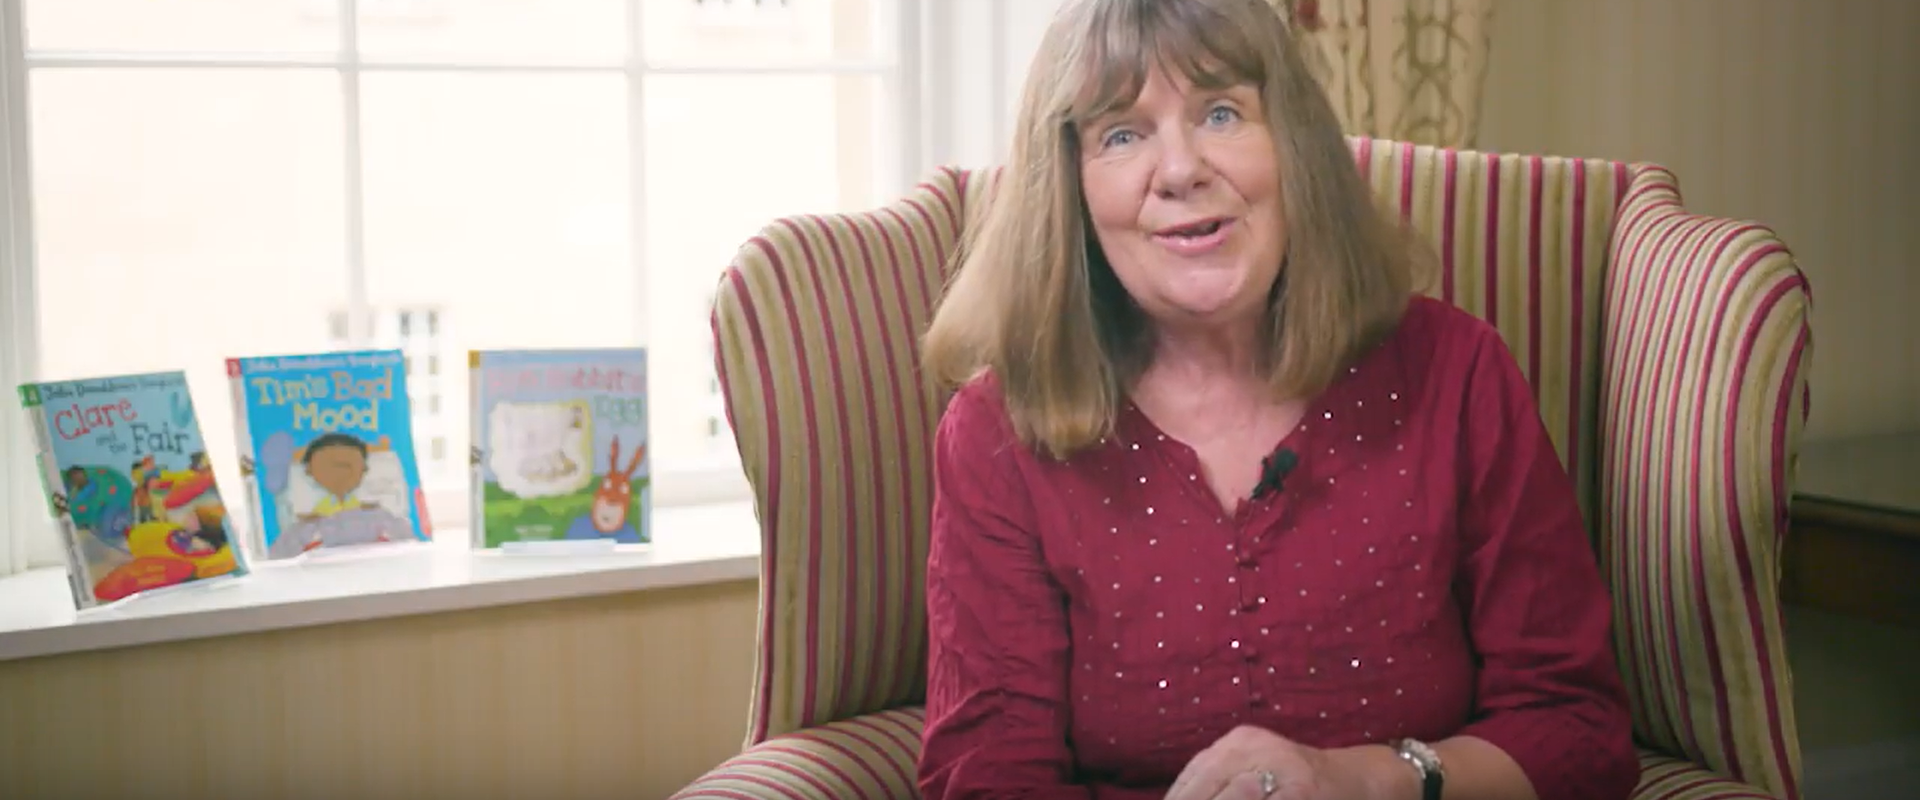 Julia Donaldson and Friends - Hay Festival - Hay Festival Anytime Audio &  Video